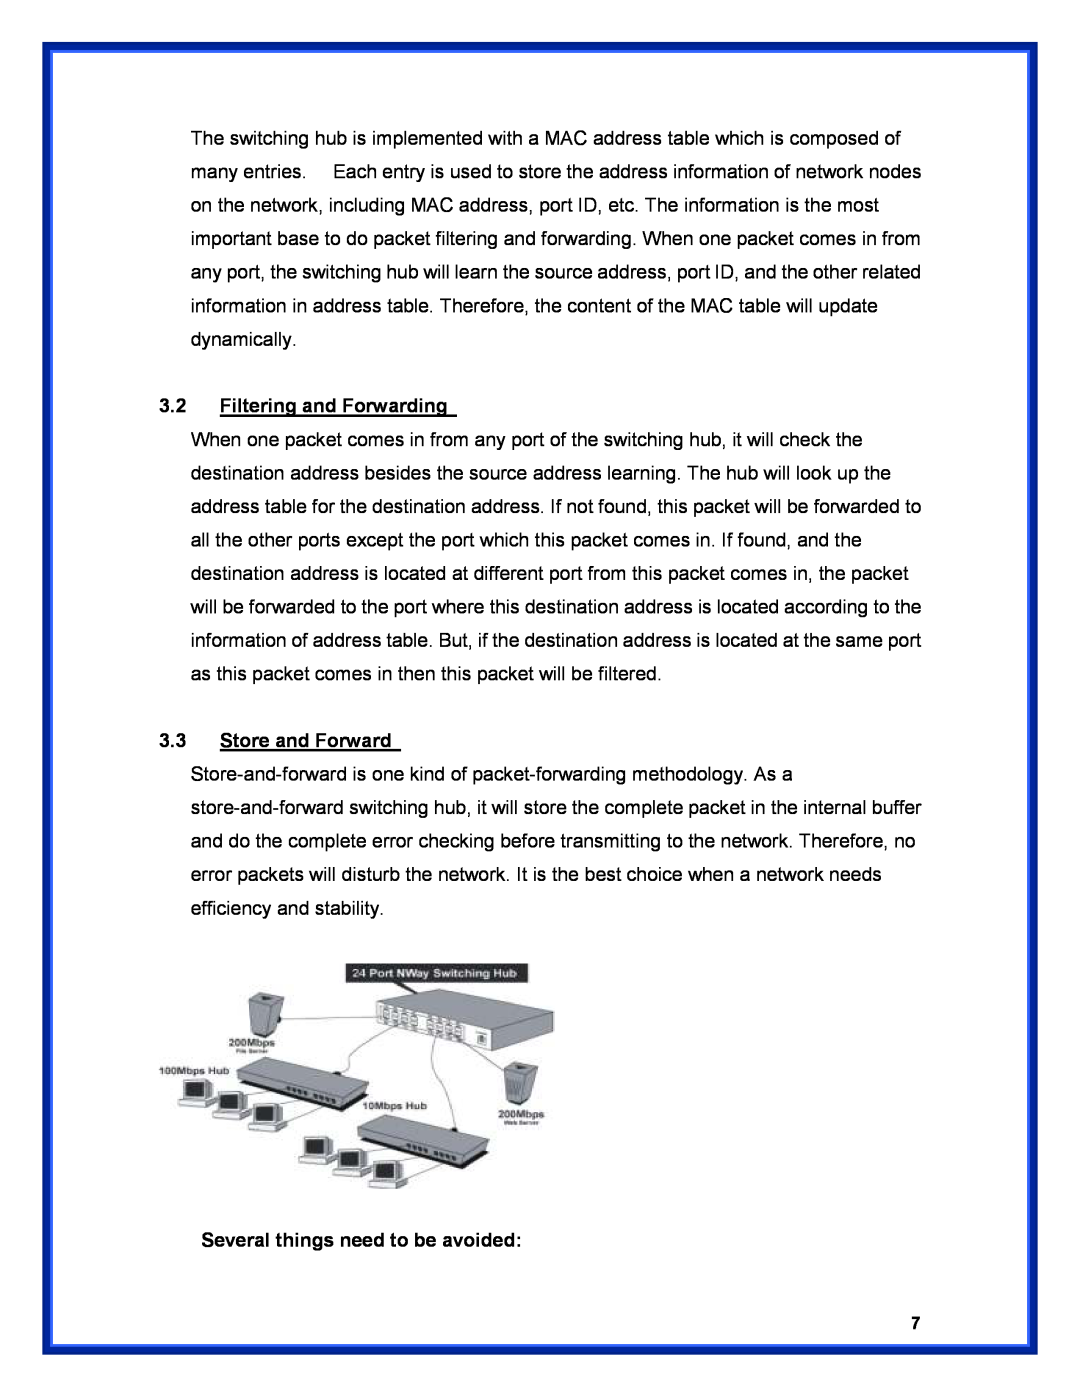 Advantek Networks ANS-2402G user manual Filtering and Forwarding, Store and Forward, Several things need to be avoided 